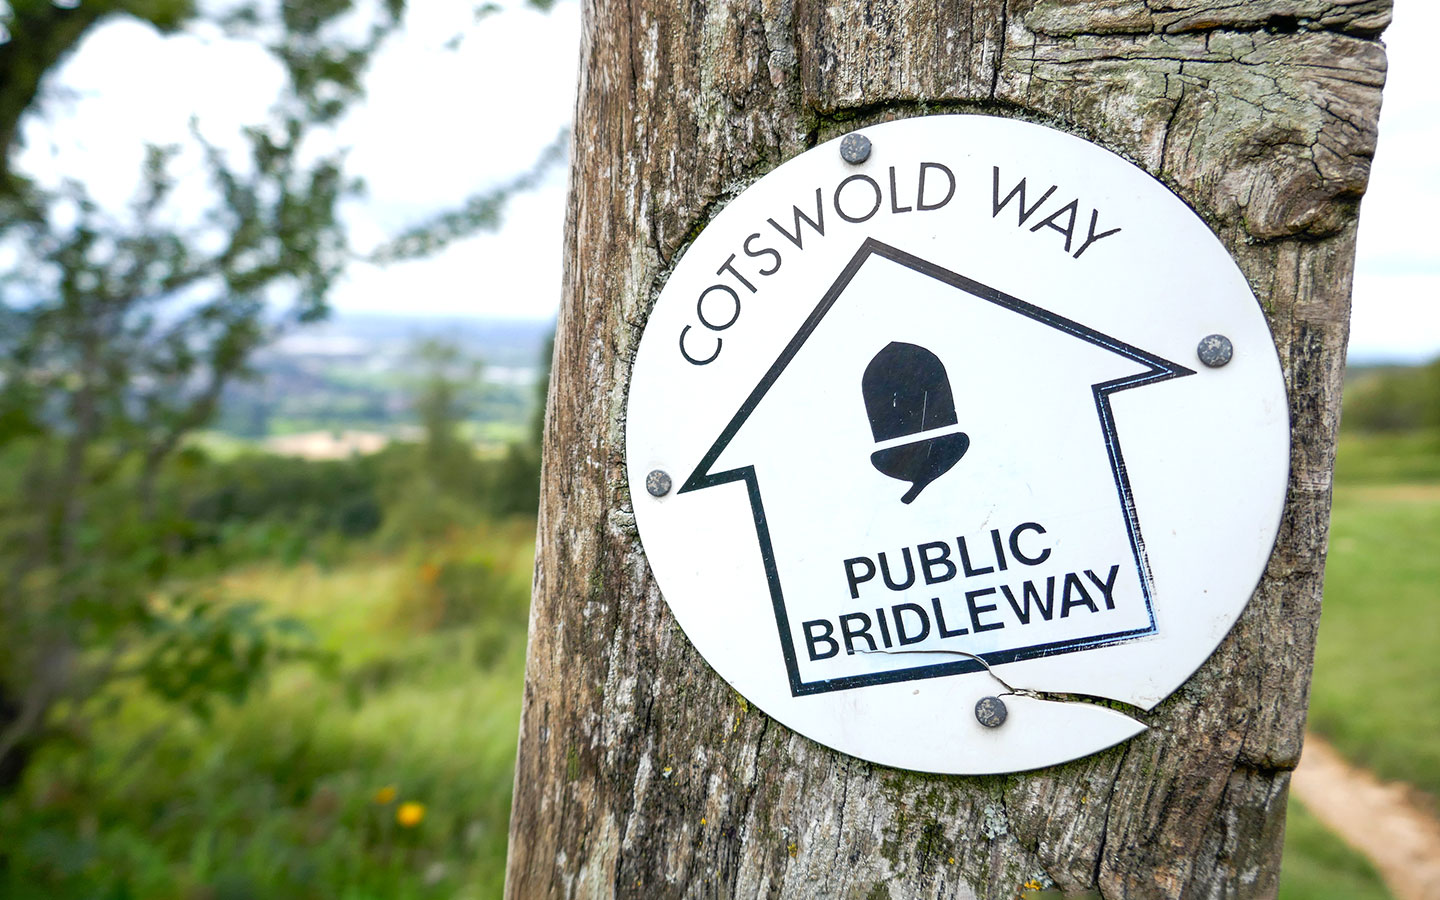 National Trail waymarkers on the Cotswold Way